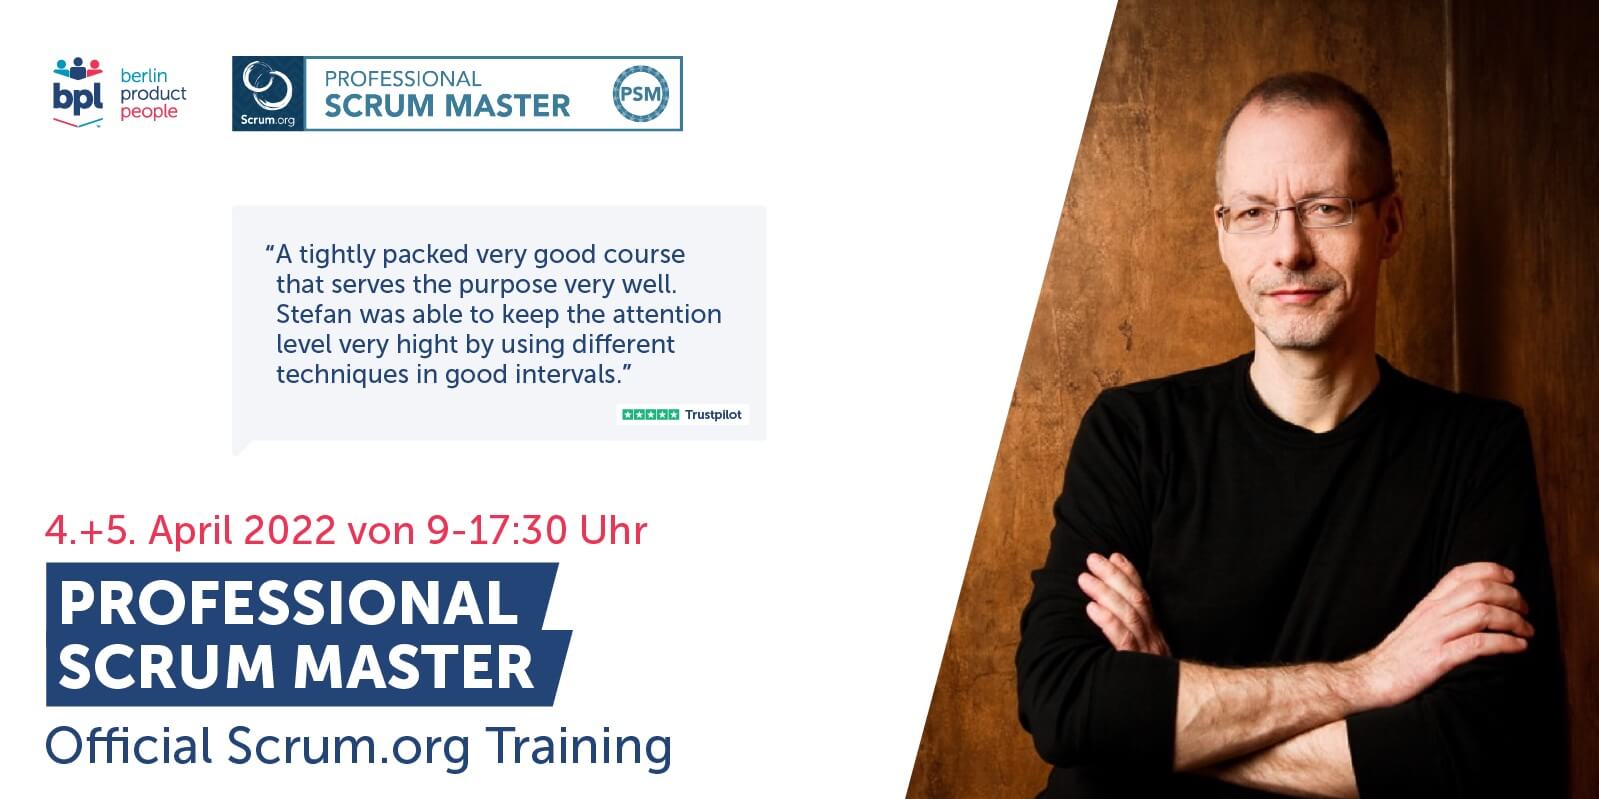 Professional Scrum Master Onlineschulung mit PSM I Zertifizierung — 4. - 5. April 2022 — Berlin Product People GmbH